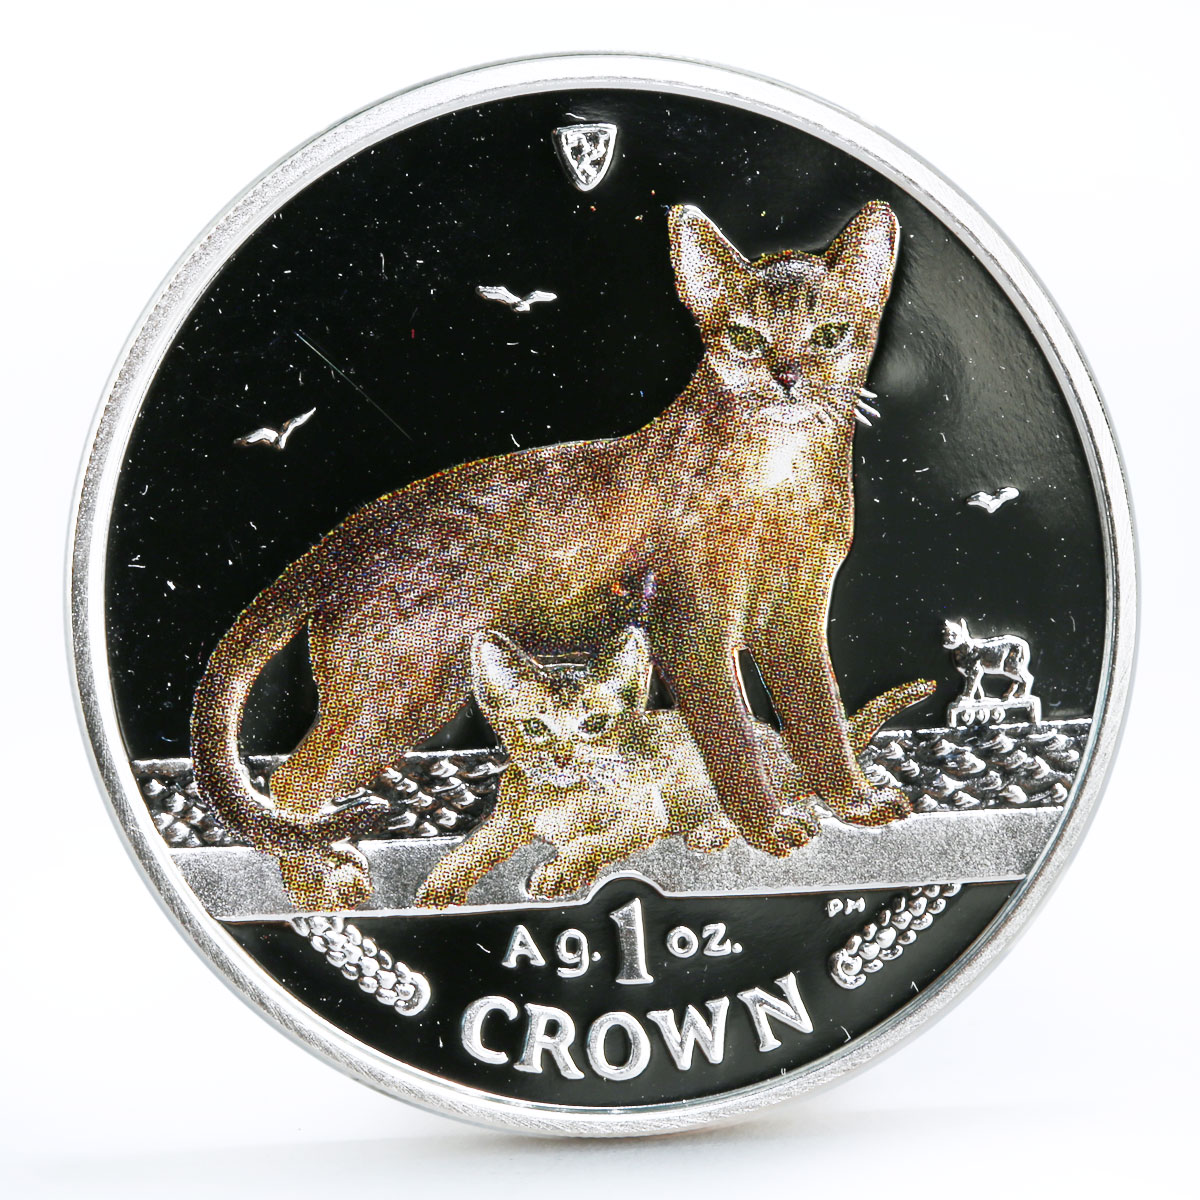 Isle of Man 1 crown Abyssinian Cats Home Pets colored proof silver coin 2010